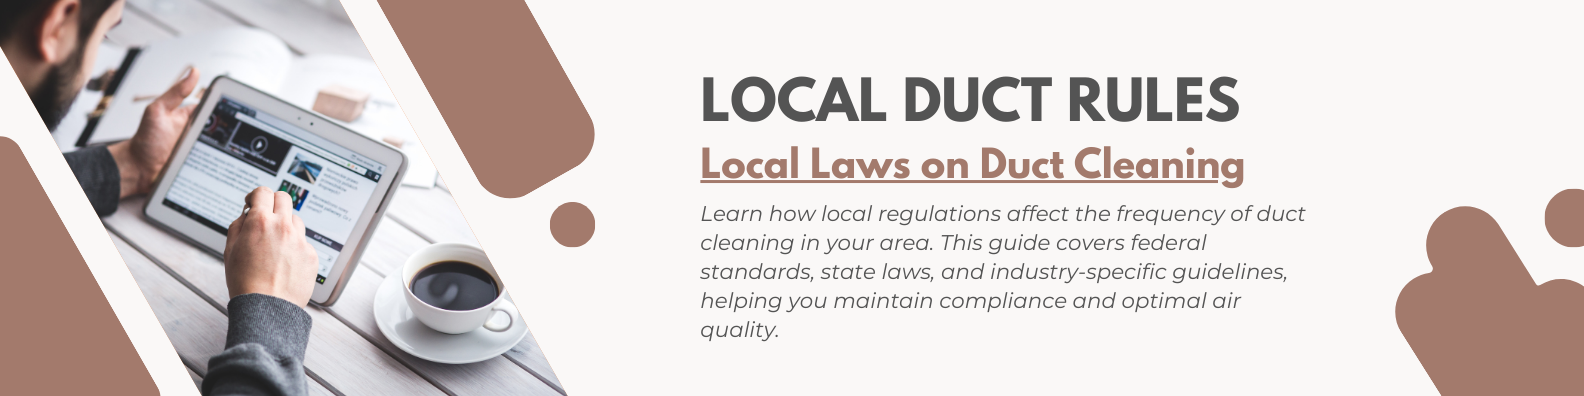 Local Laws on Duct Cleaning